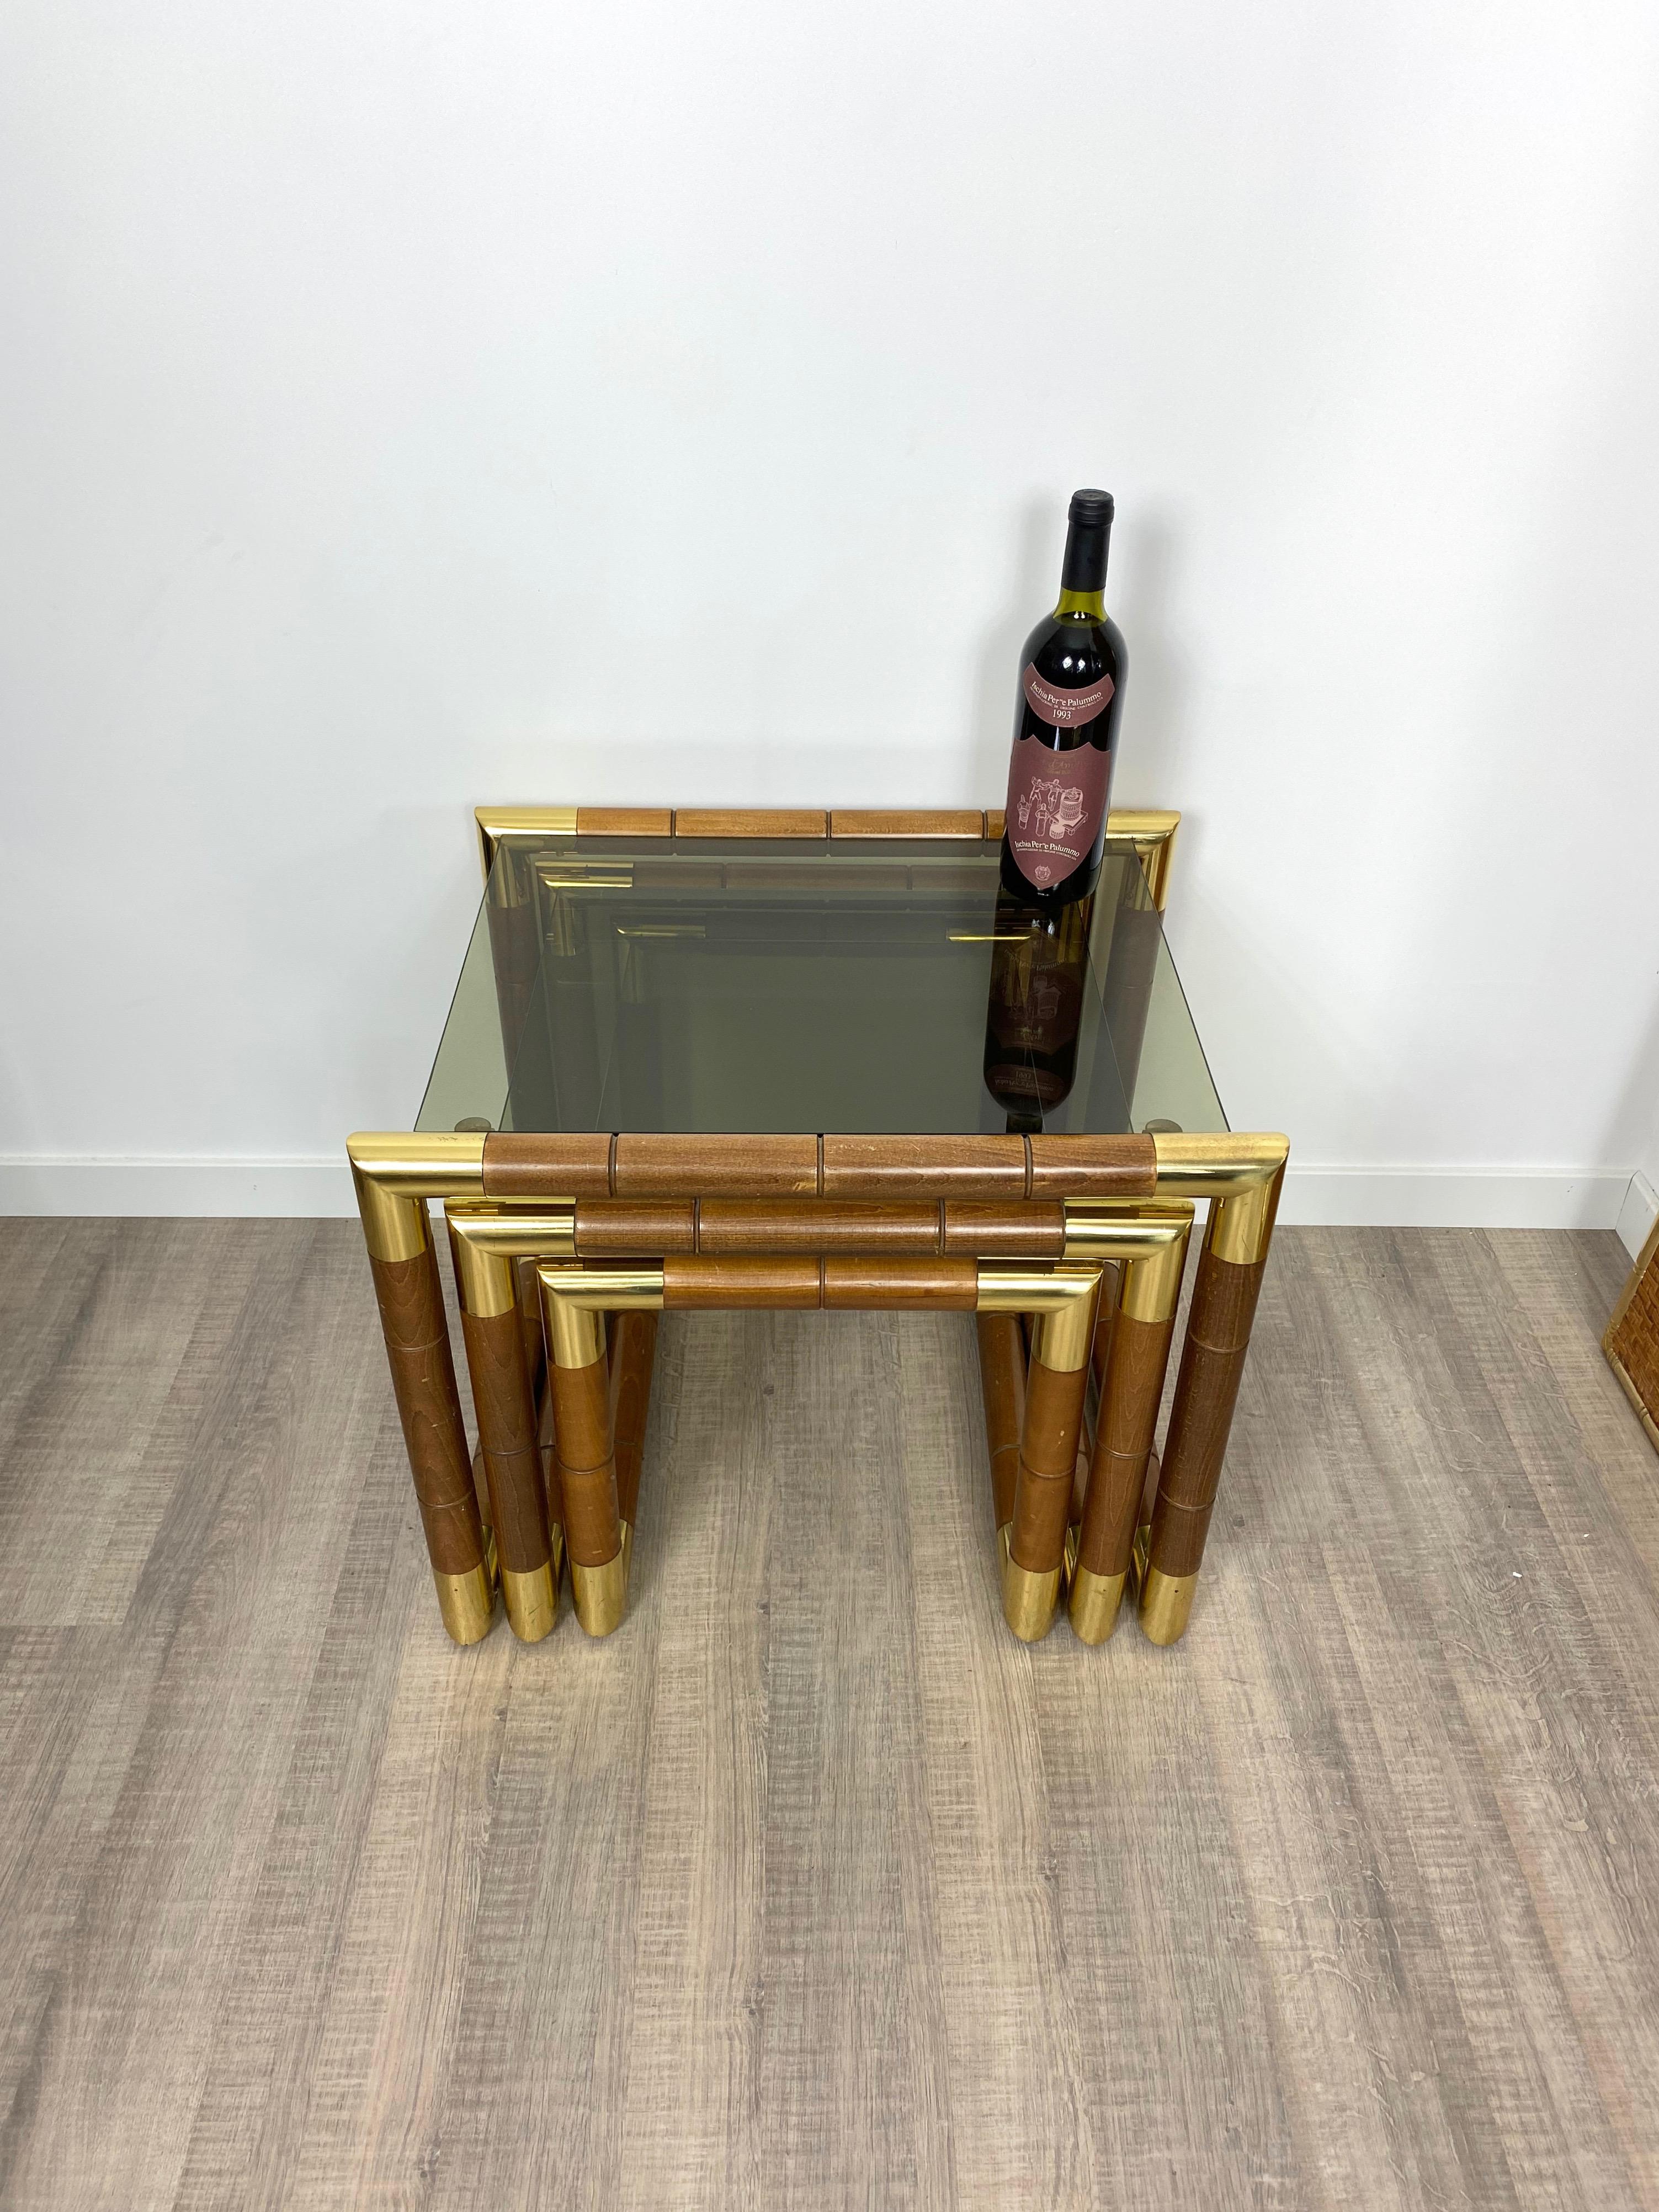 Set of Nesting Table in Wood, Brass and Glass, Italy, 1970s For Sale 7